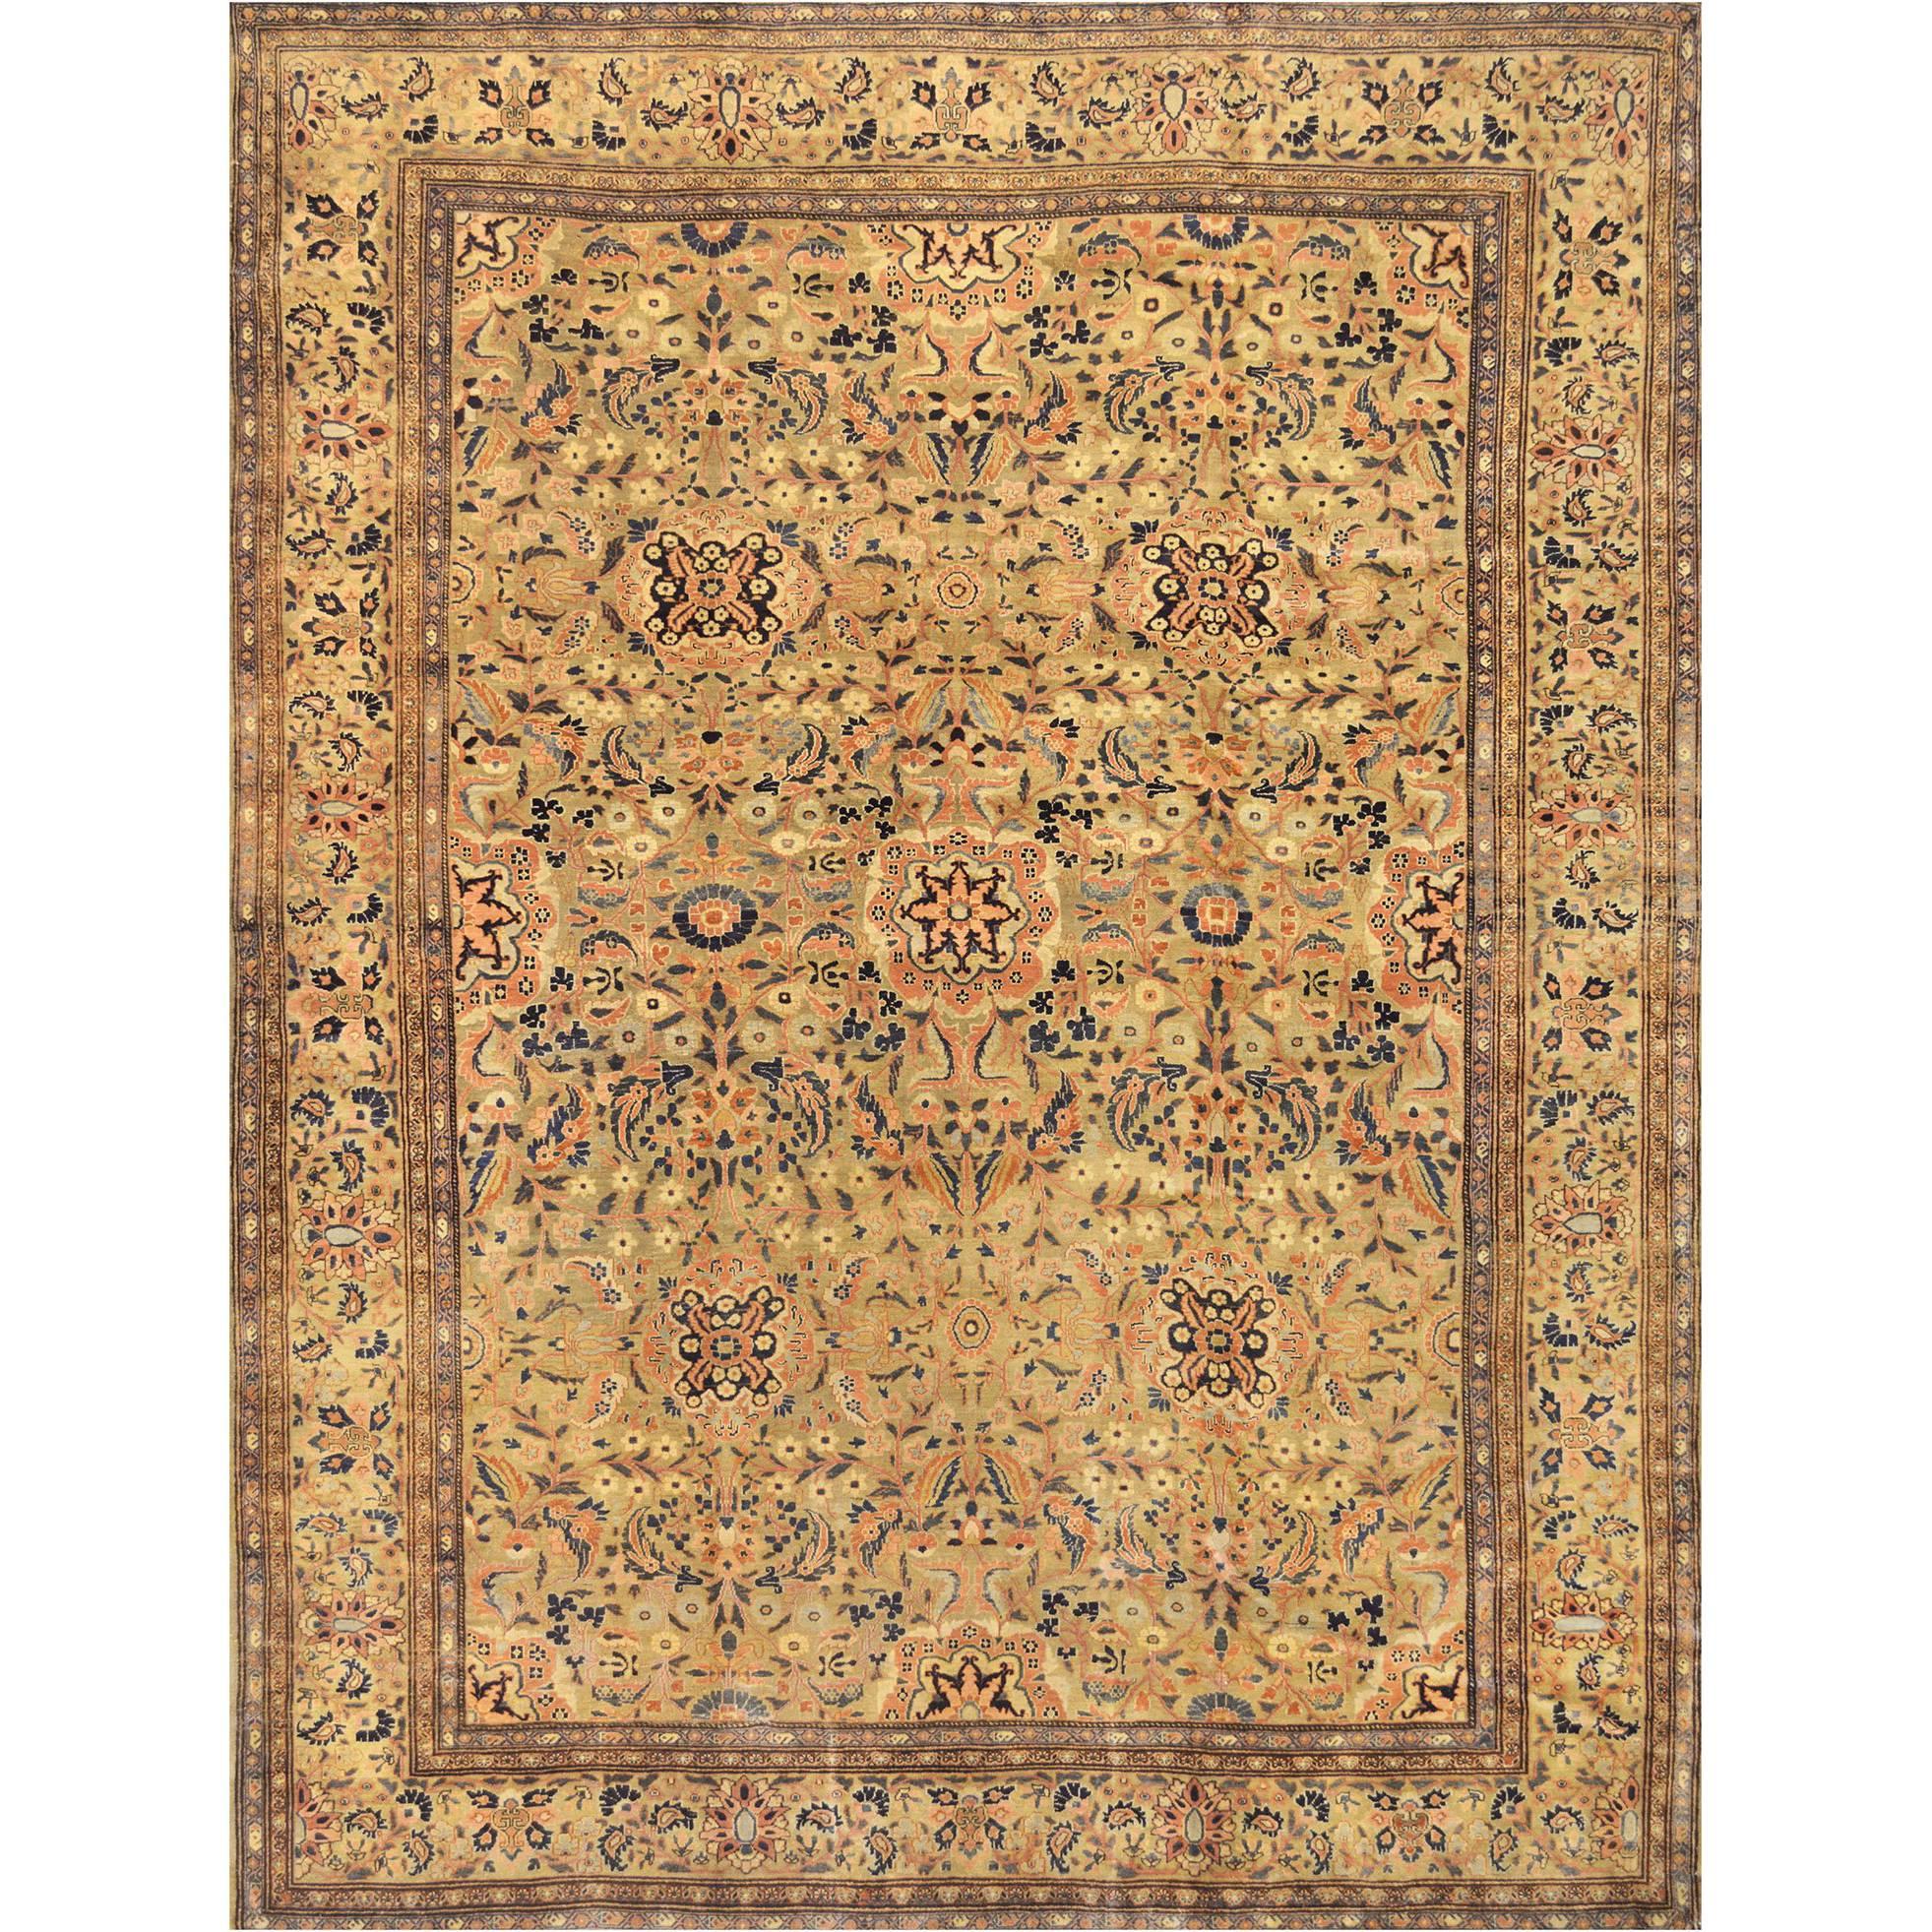 Late 19th Century Fereghan Rug from West Persia